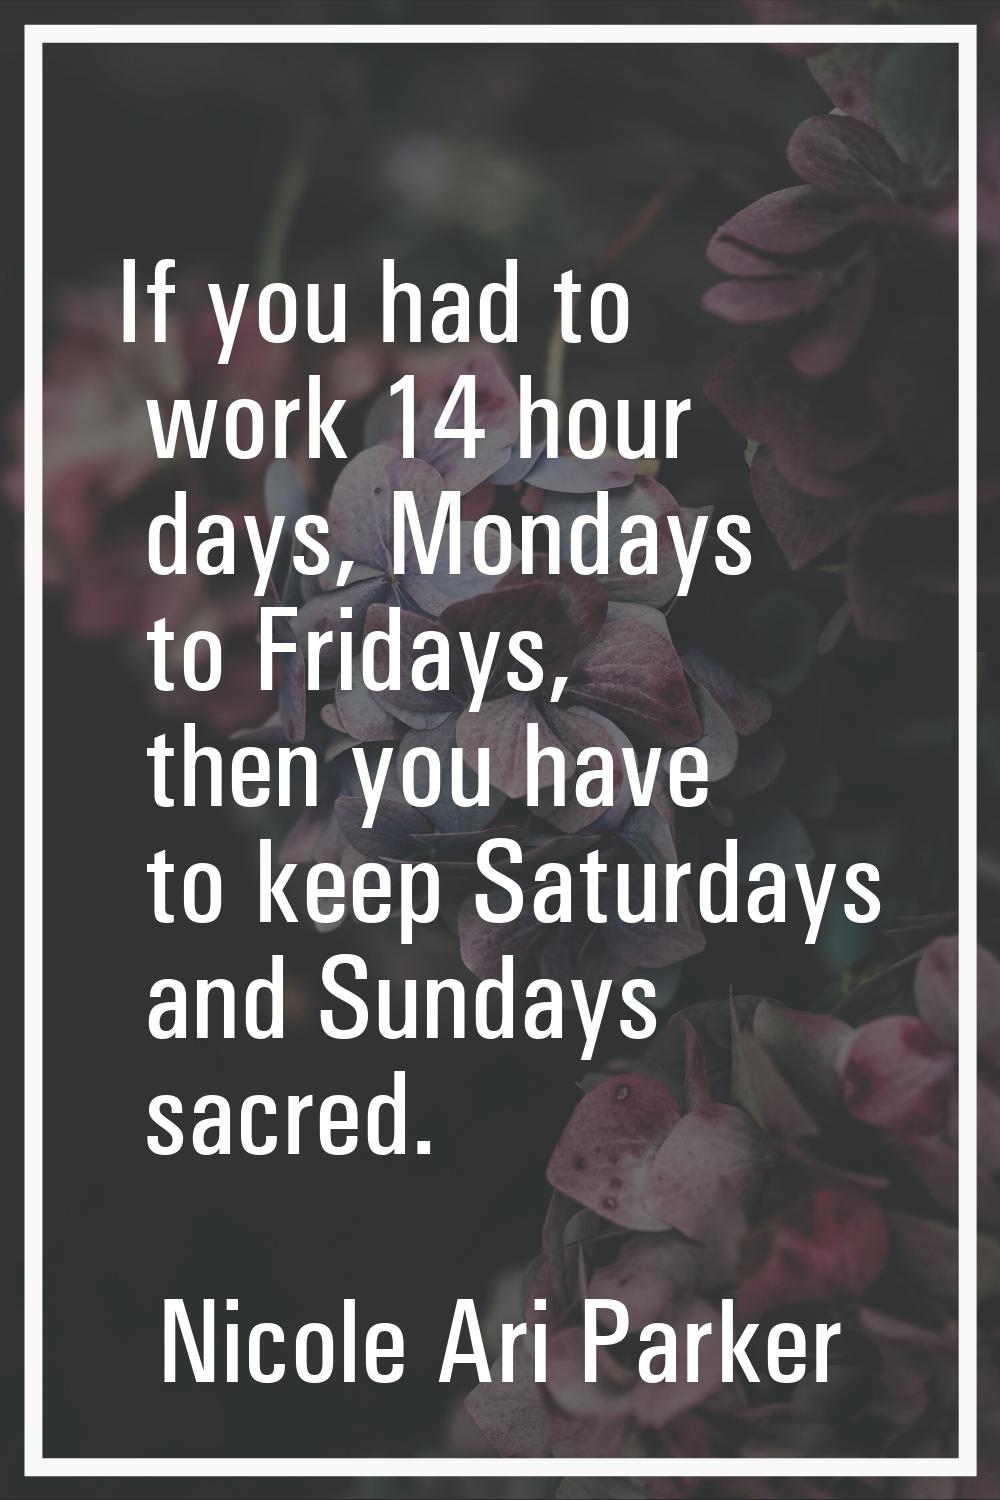 If you had to work 14 hour days, Mondays to Fridays, then you have to keep Saturdays and Sundays sa